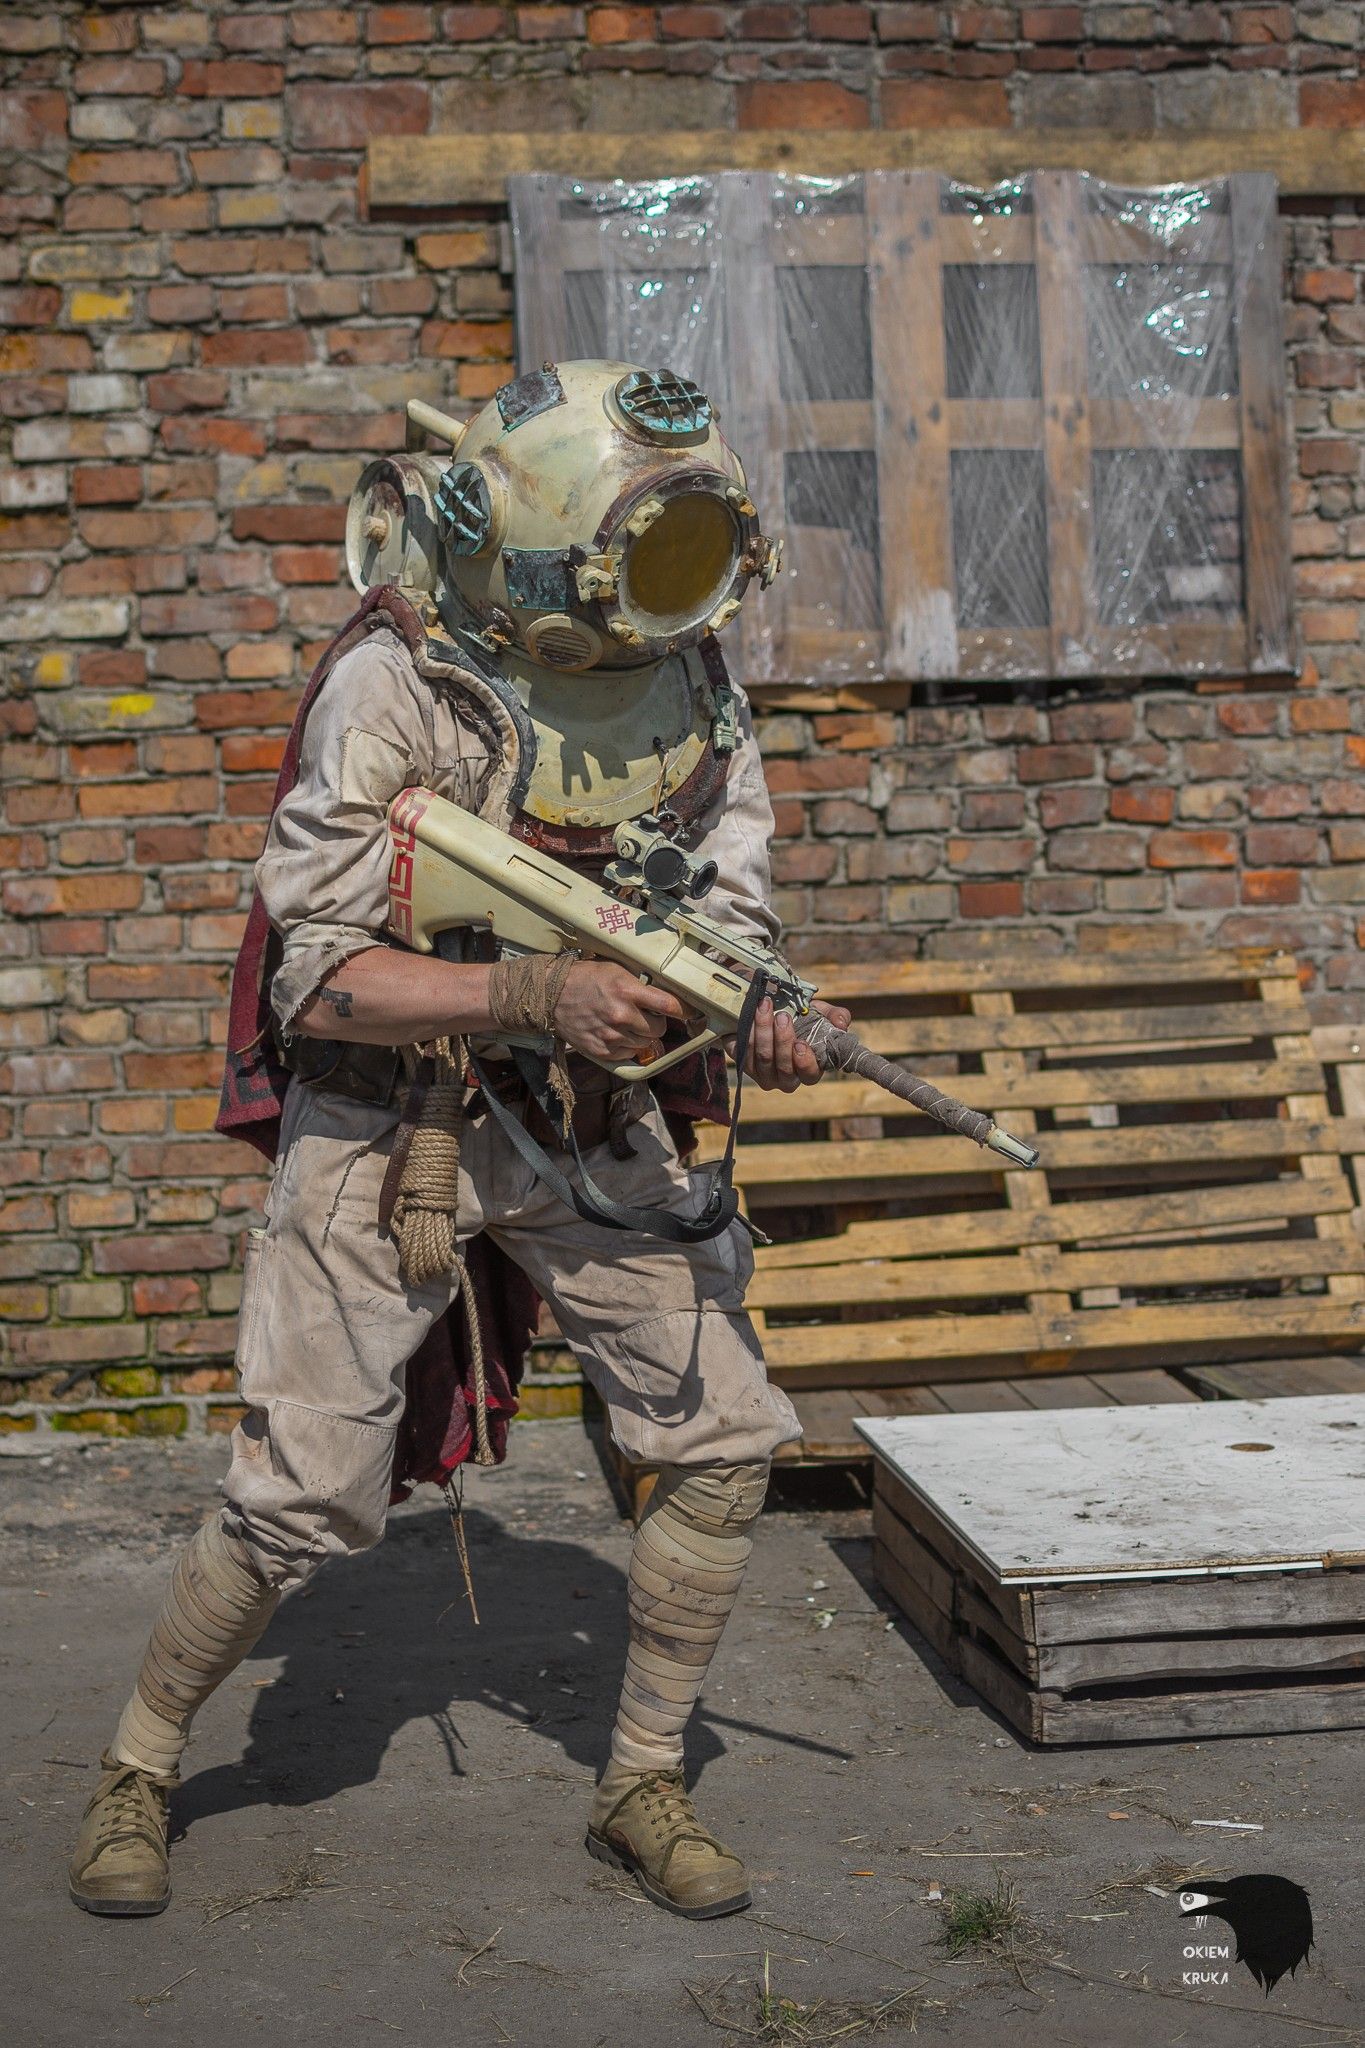 A diving-helmeted soldier carries their rifle in front of a brick wall with some pallets.